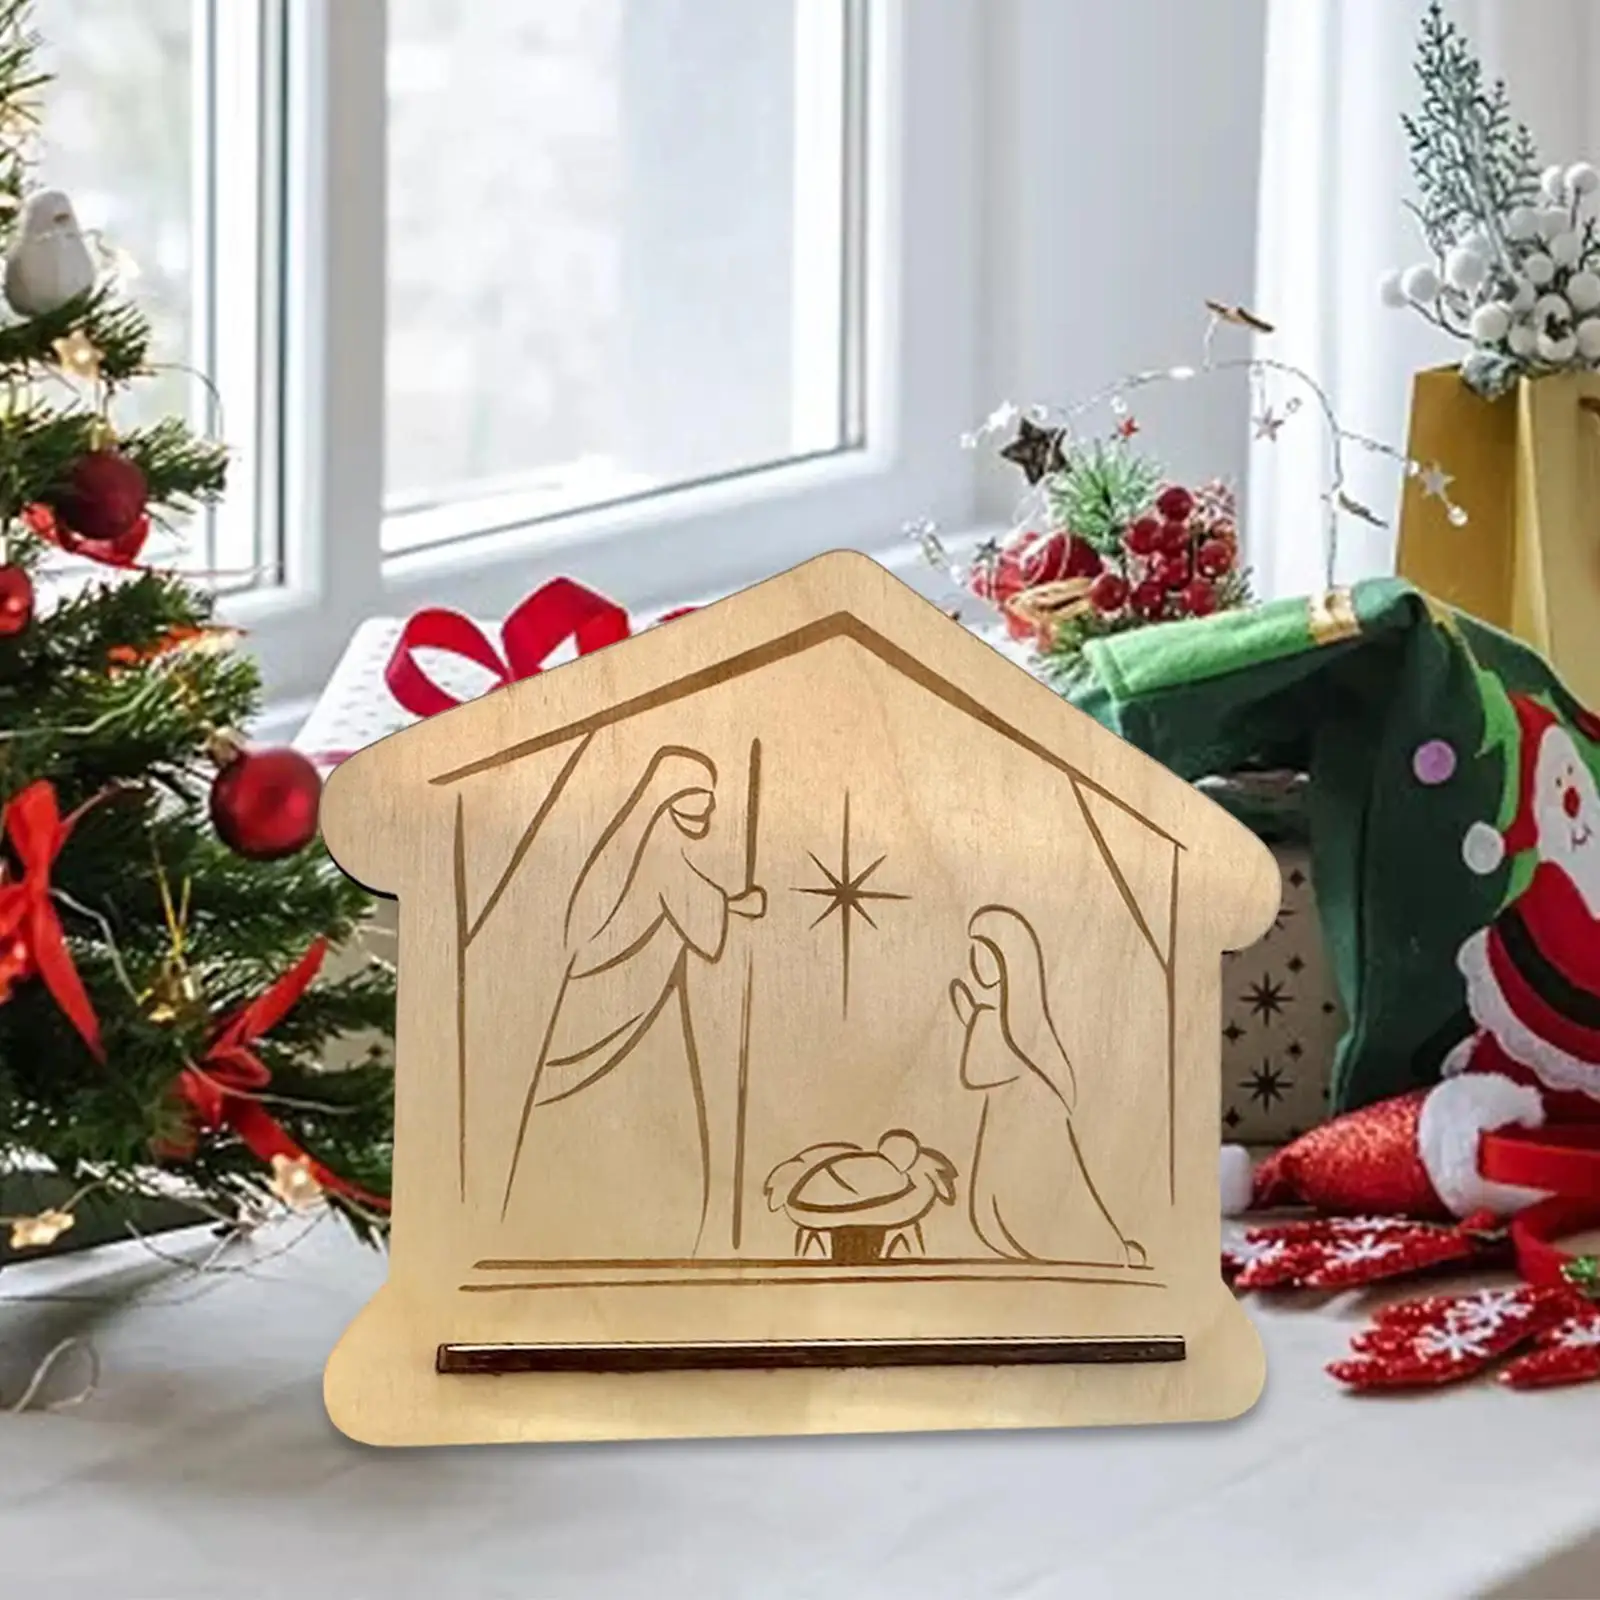 The Birth of Jesus Decorations Wooden Festival Ornament Christian Ornaments for Home Table Centerpiece Fireplace Family Indoor